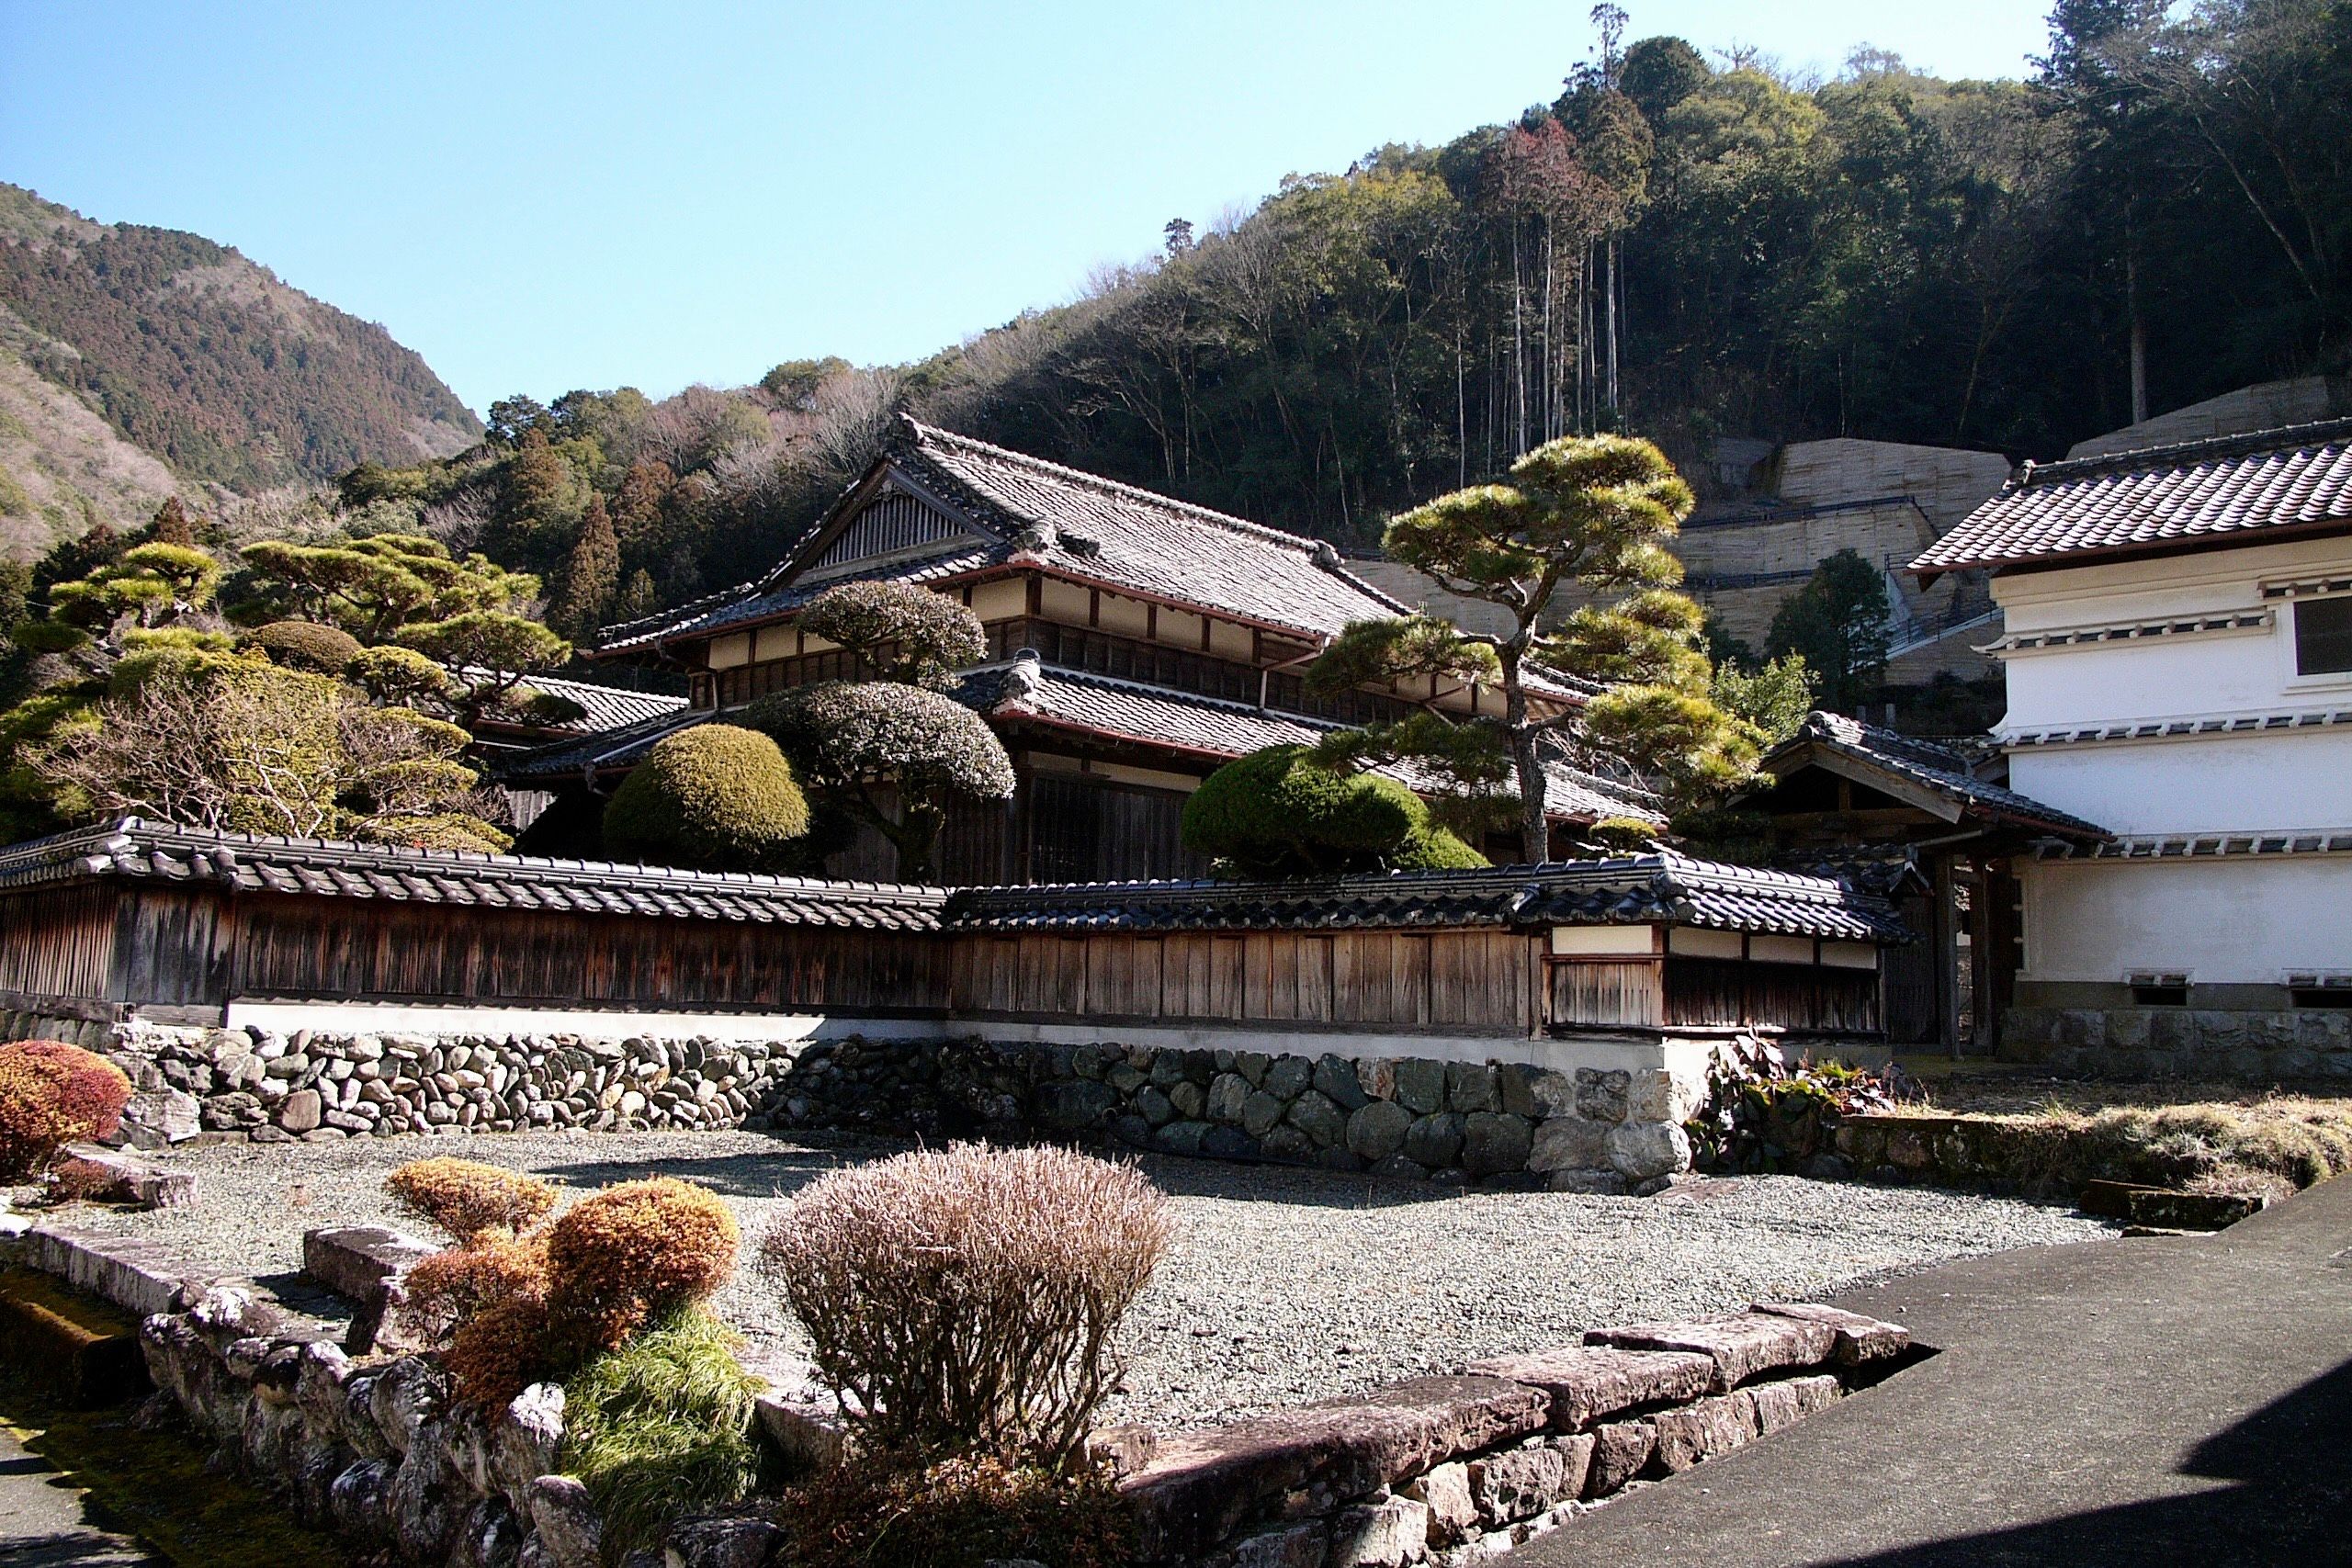 A traditional Japanese house in a village, complete with stone wall and carefully manicured trees.